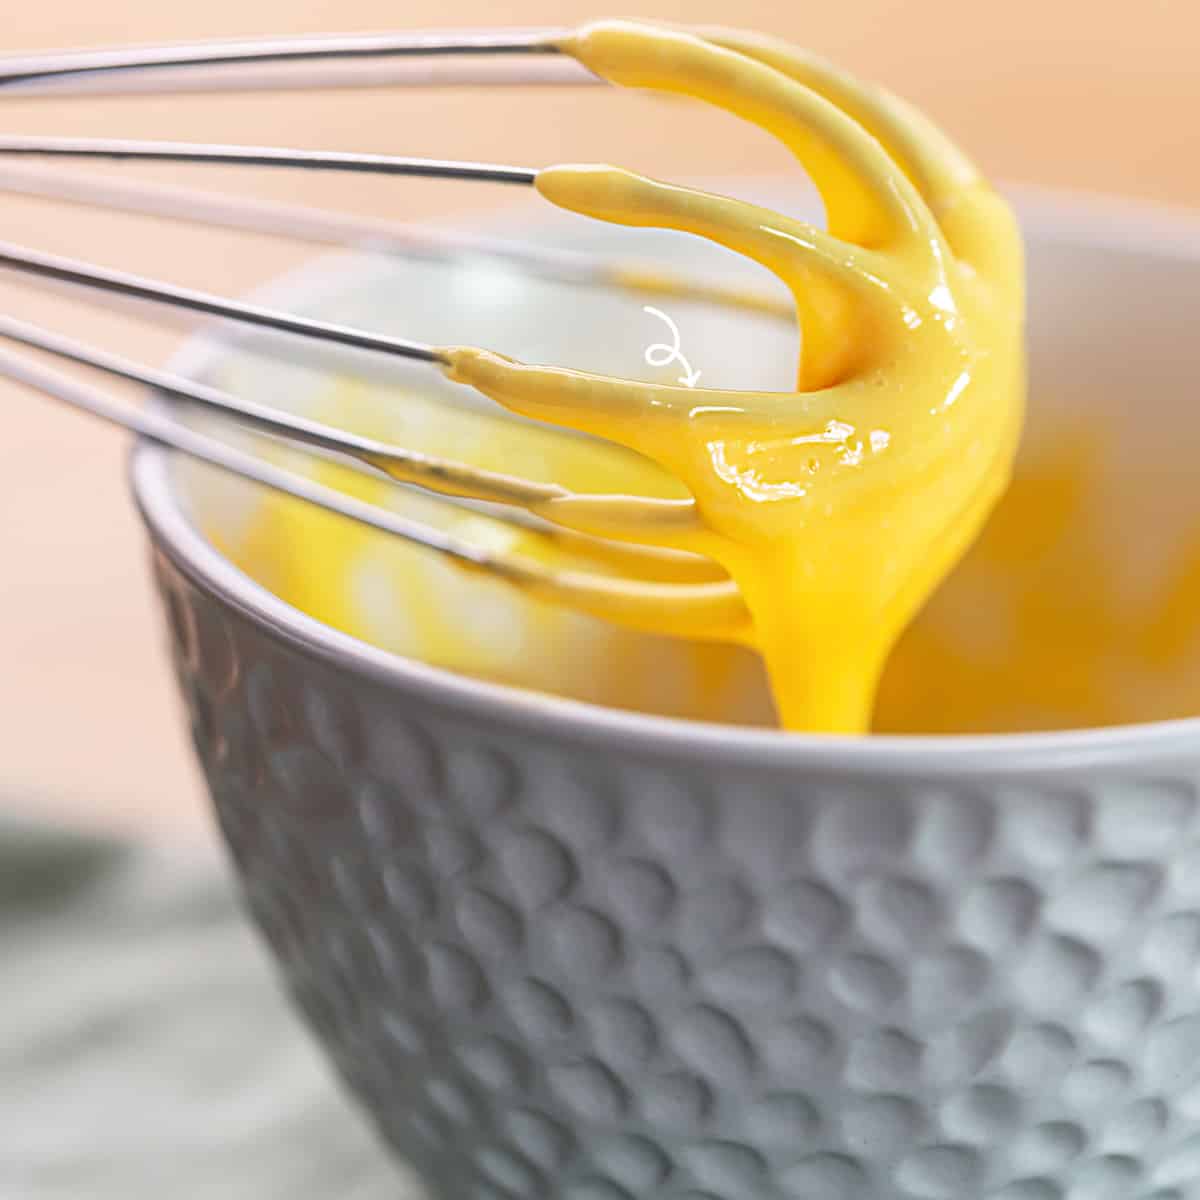 If you’re looking for a unique and flavorful way to add some zing to your meals, look no further than creamy togarashi sauce. This Japanese-inspired condiment is perfect for spicing everything from chicken and fish dishes to stir-fries and more.